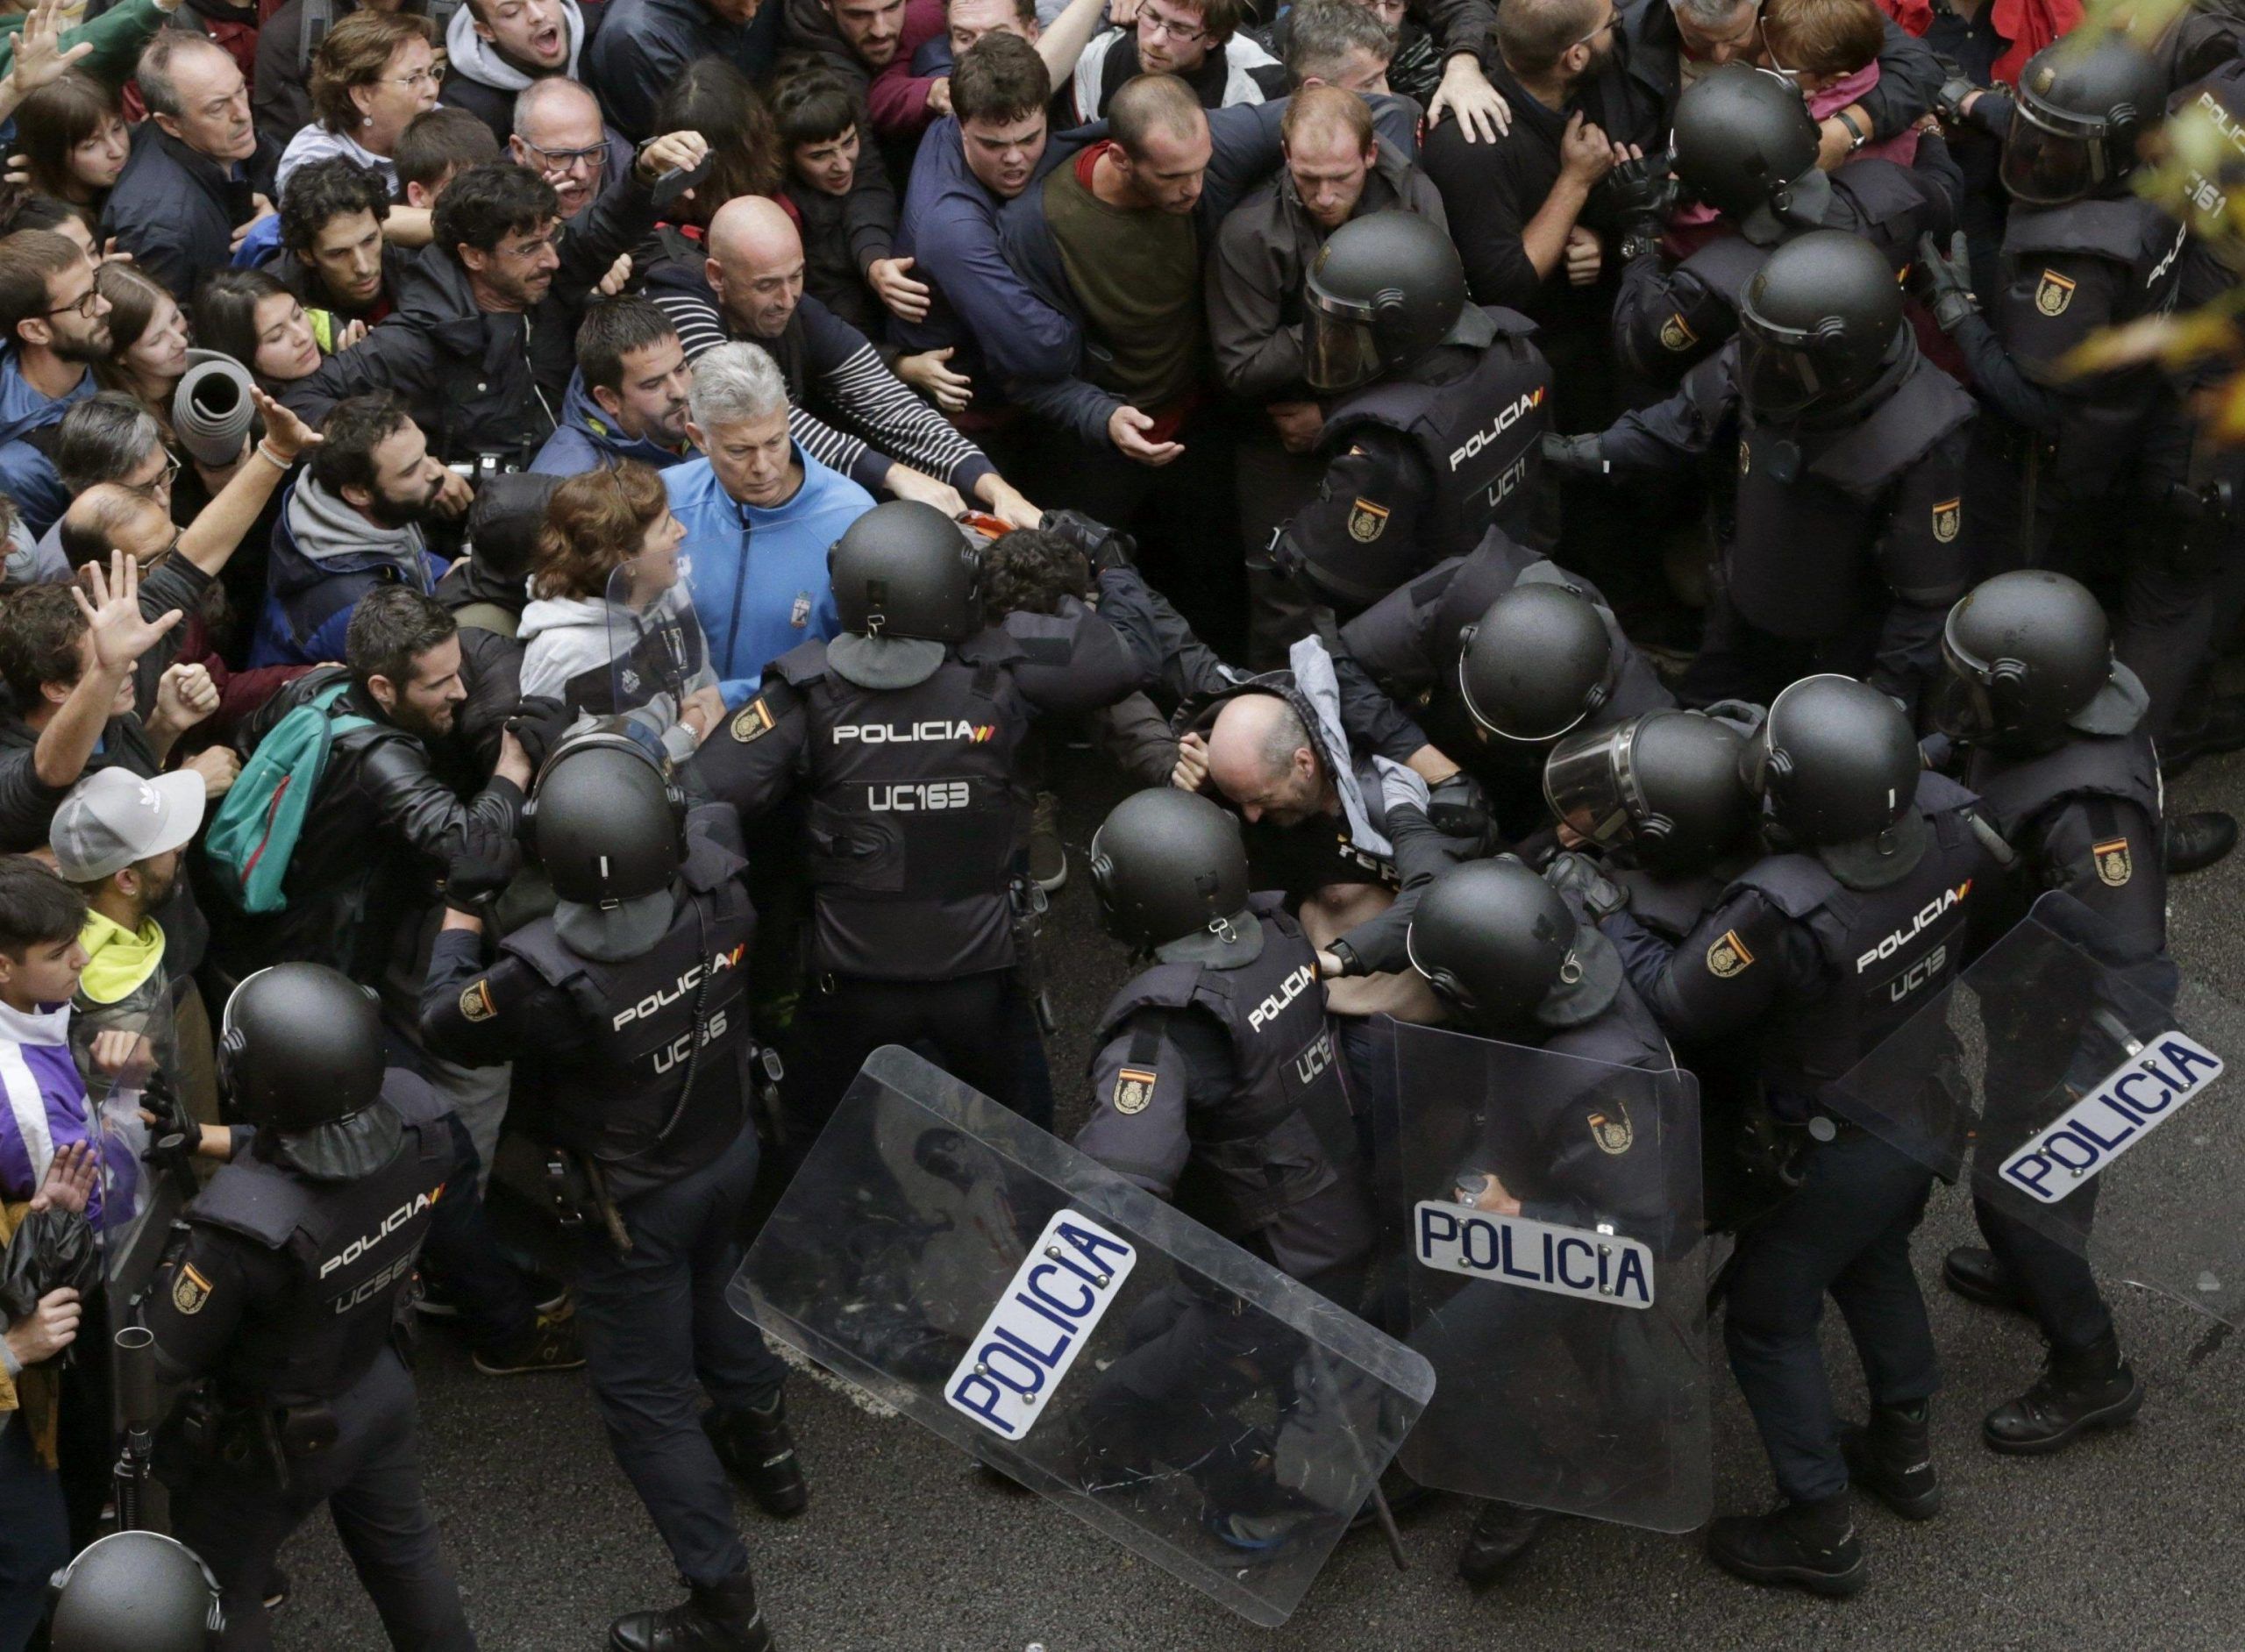 Clashes during the Catalan independence referendum